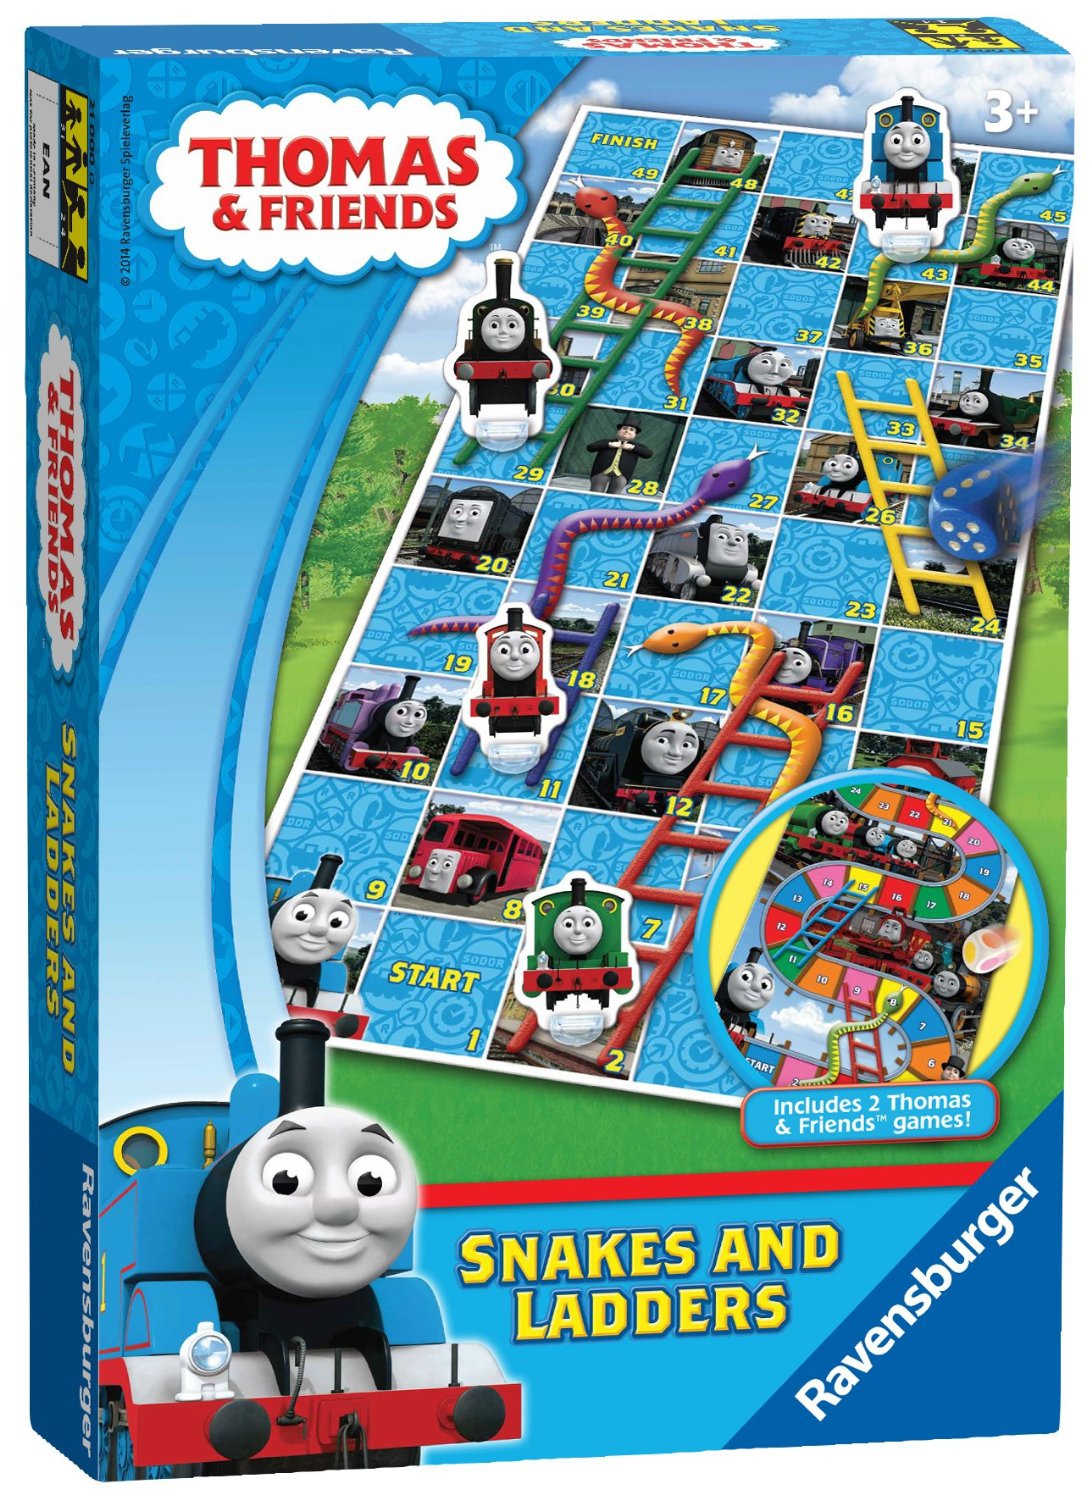 Ravensburger Thomas & Friends Game Snakes and Ladders Puzzle